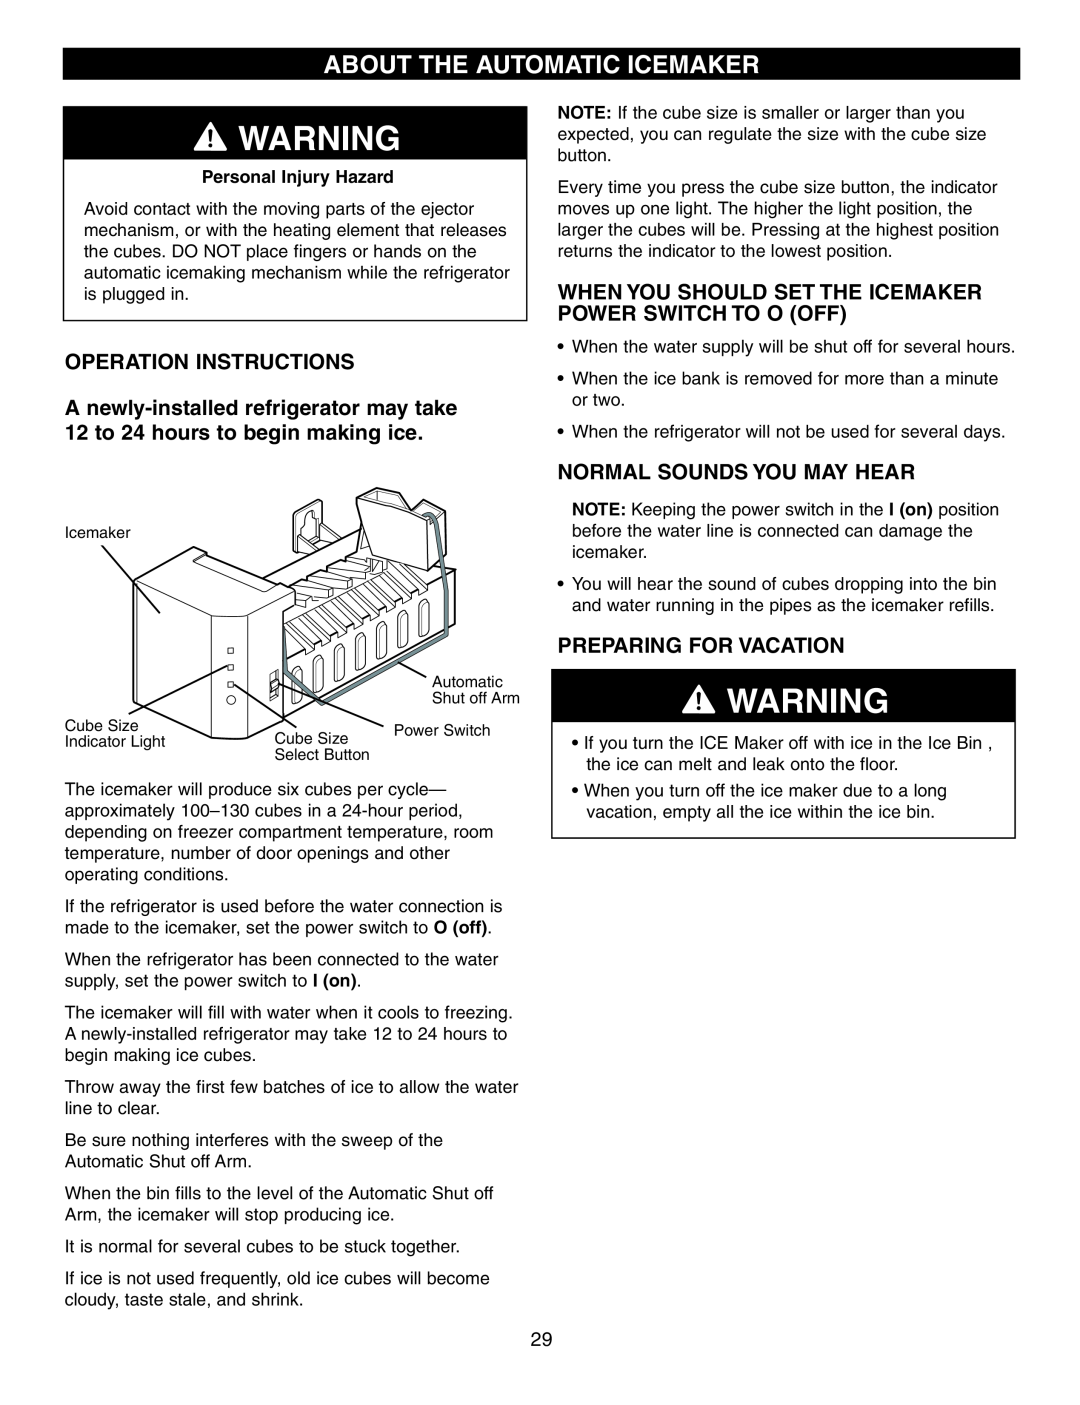 LG Electronics LFX21970, LFX25960 manual About The Automatic Icemaker, Operation Instructions, Normal Sounds You May Hear 